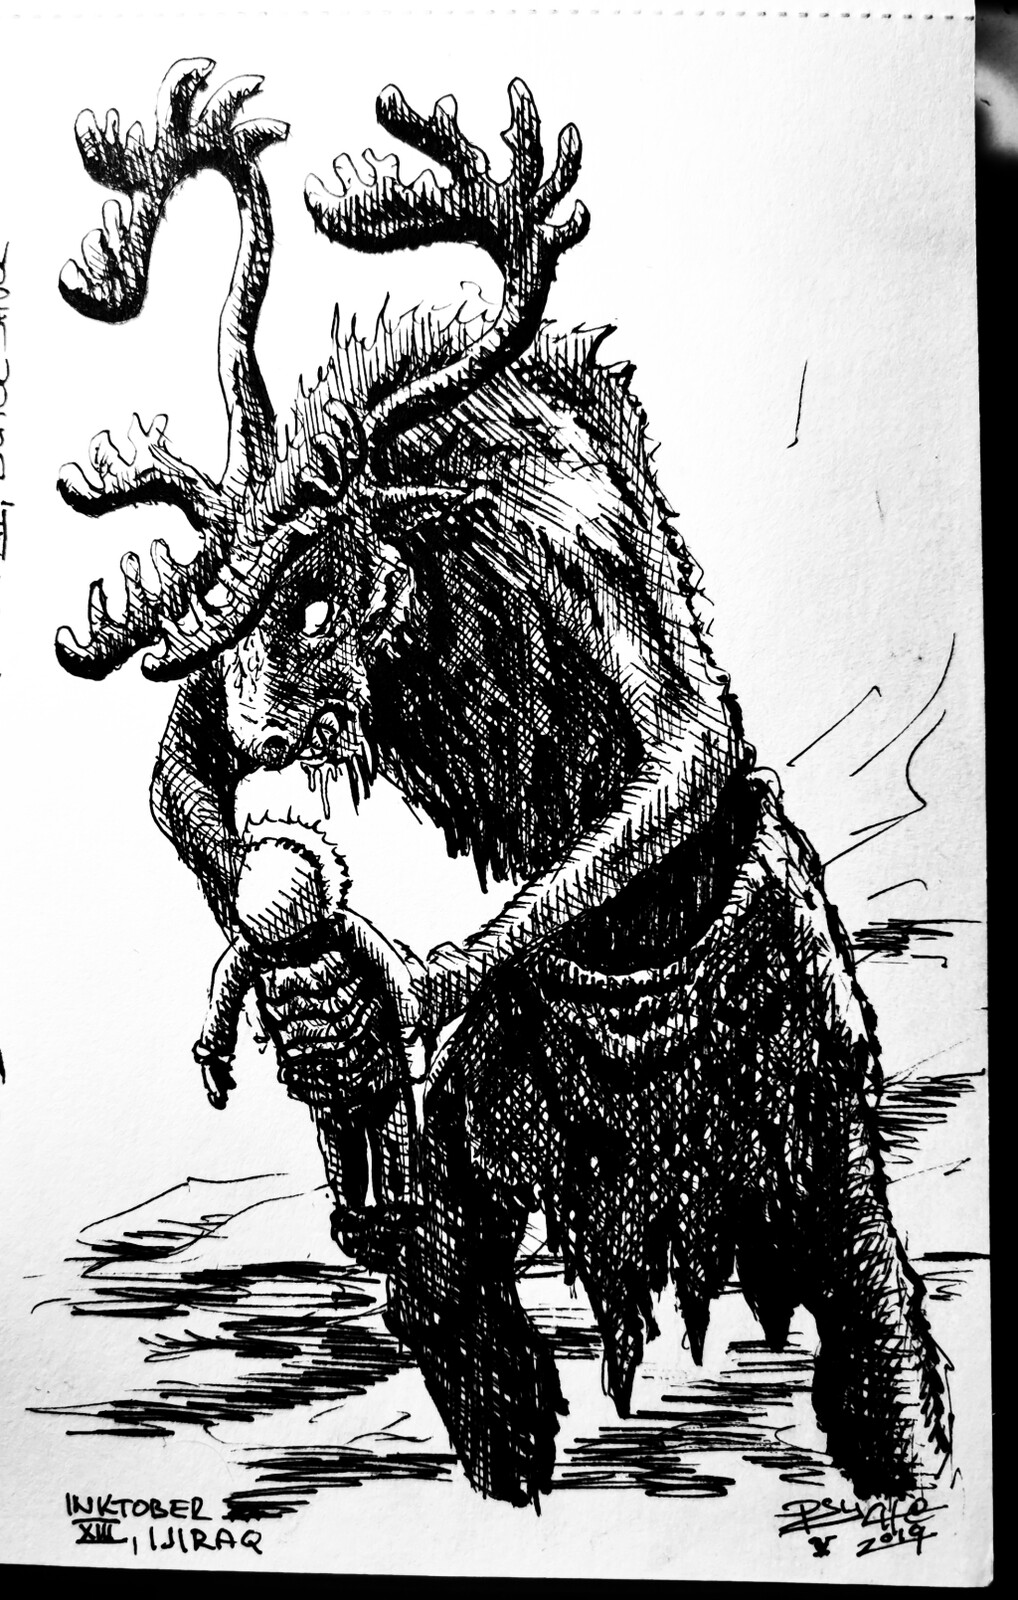 Ijiraq - Normally invisible demon from Innuit mythology resembles a human-caribou hybrid who kidnaps children, only to leave them to die from the harsh arctic elements.